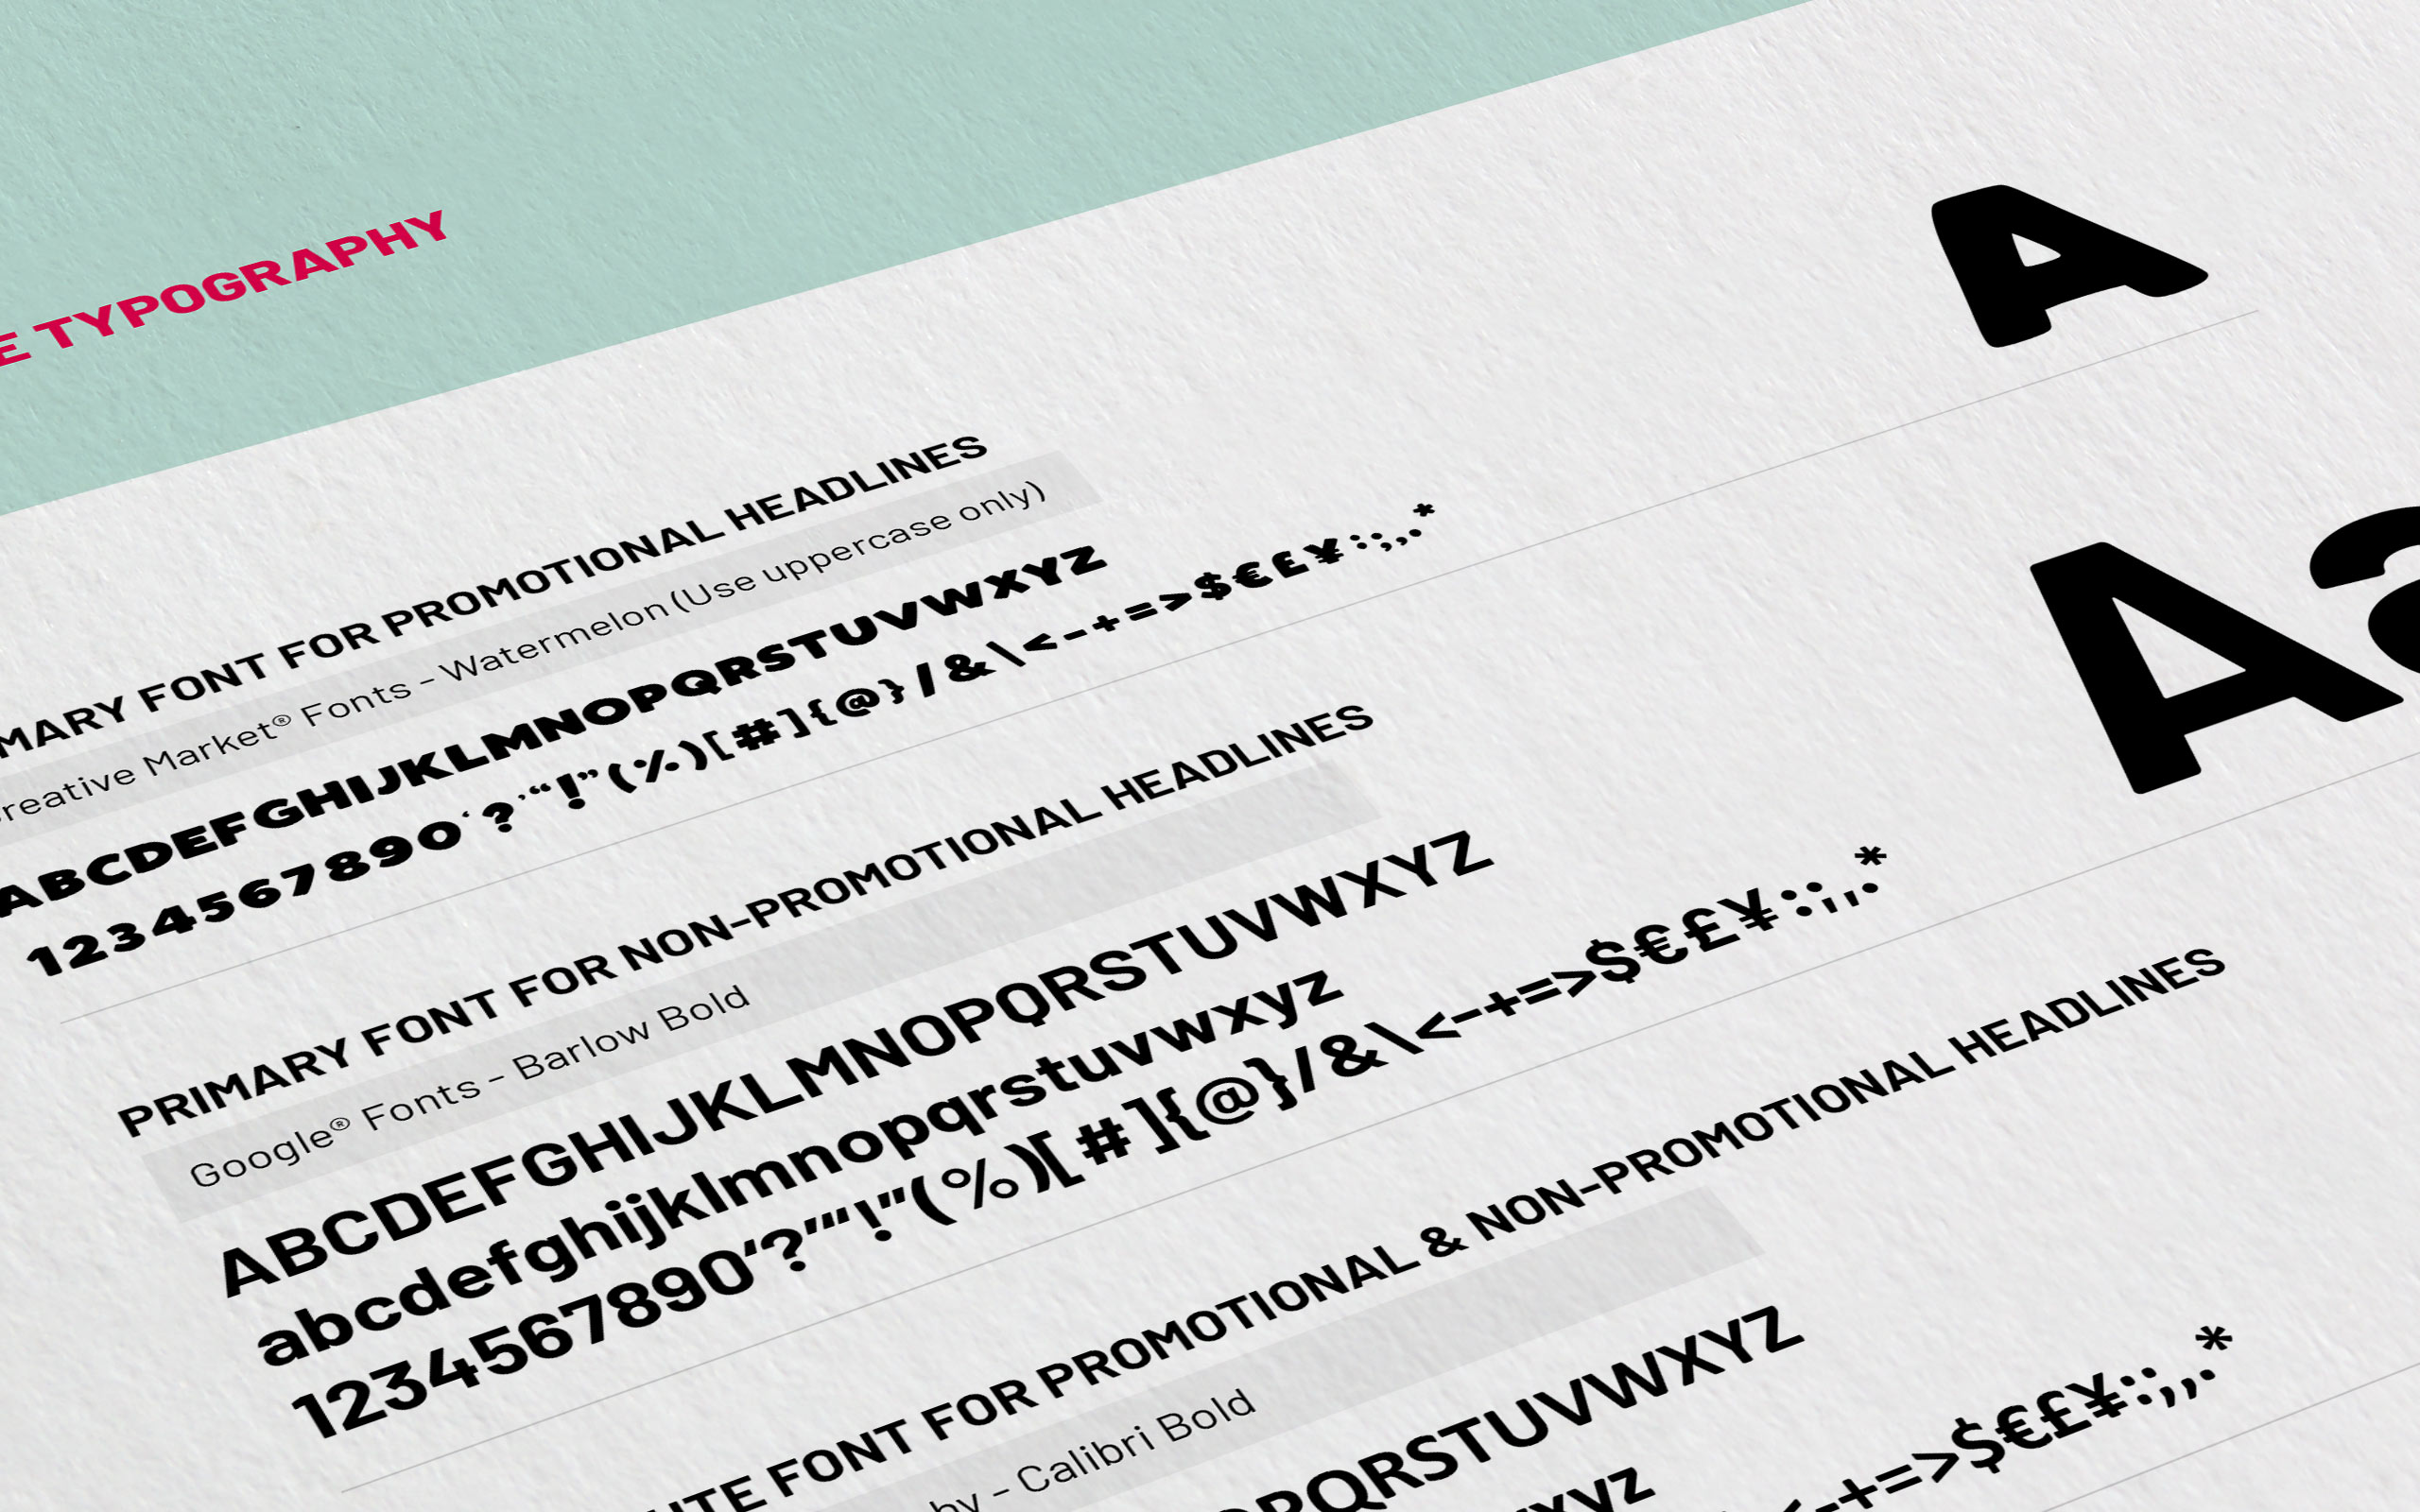 Lifeworks Charity Brand Identity Design - Typography Usage in the Brand Guidelines Document